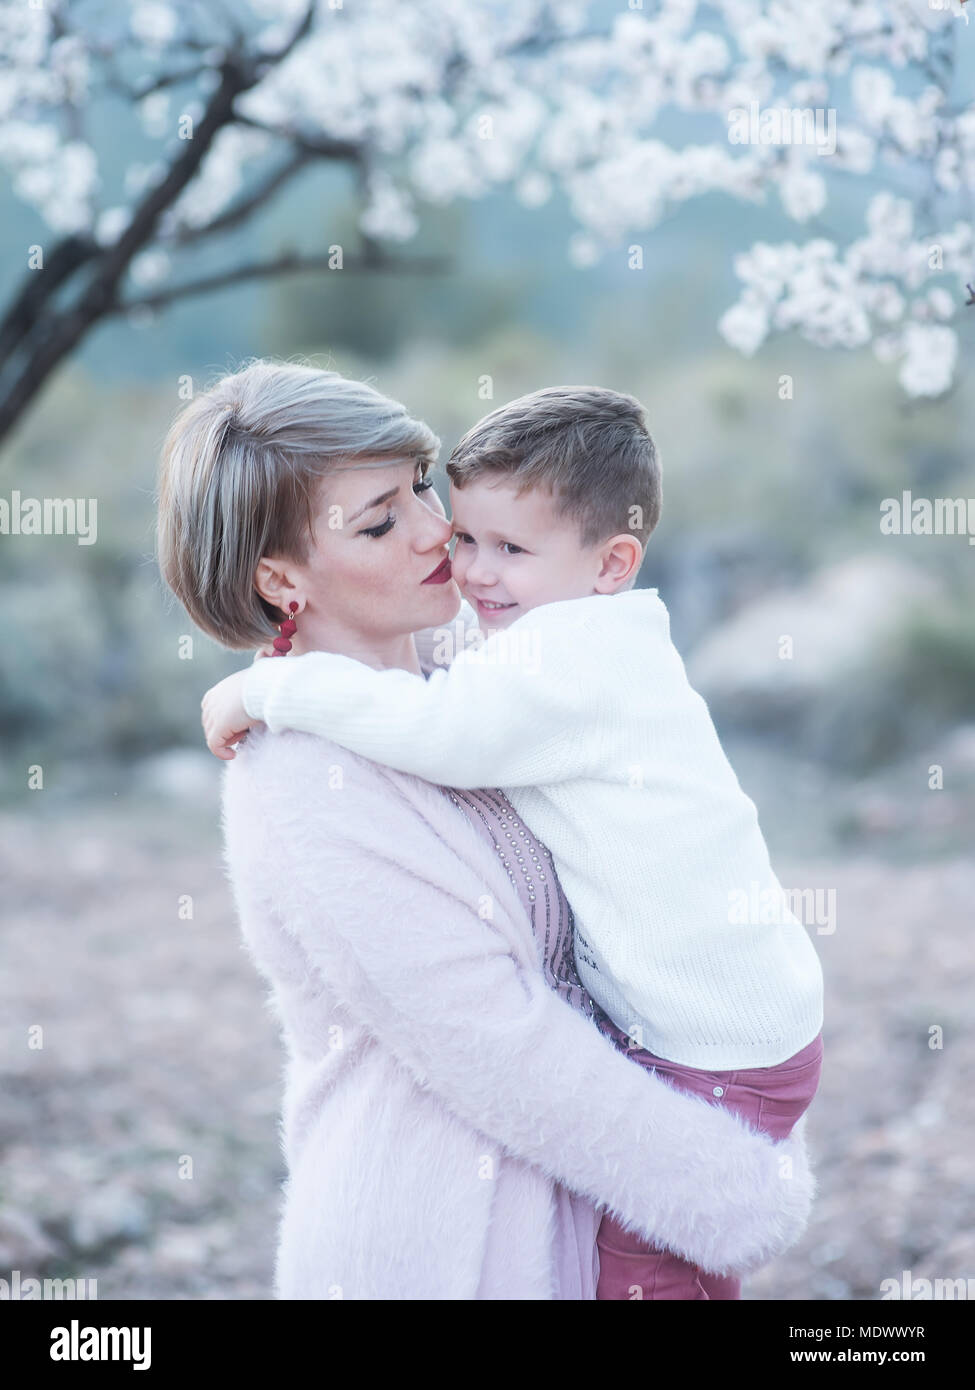 Mom and her son are embraced tenderly. Stock Photo